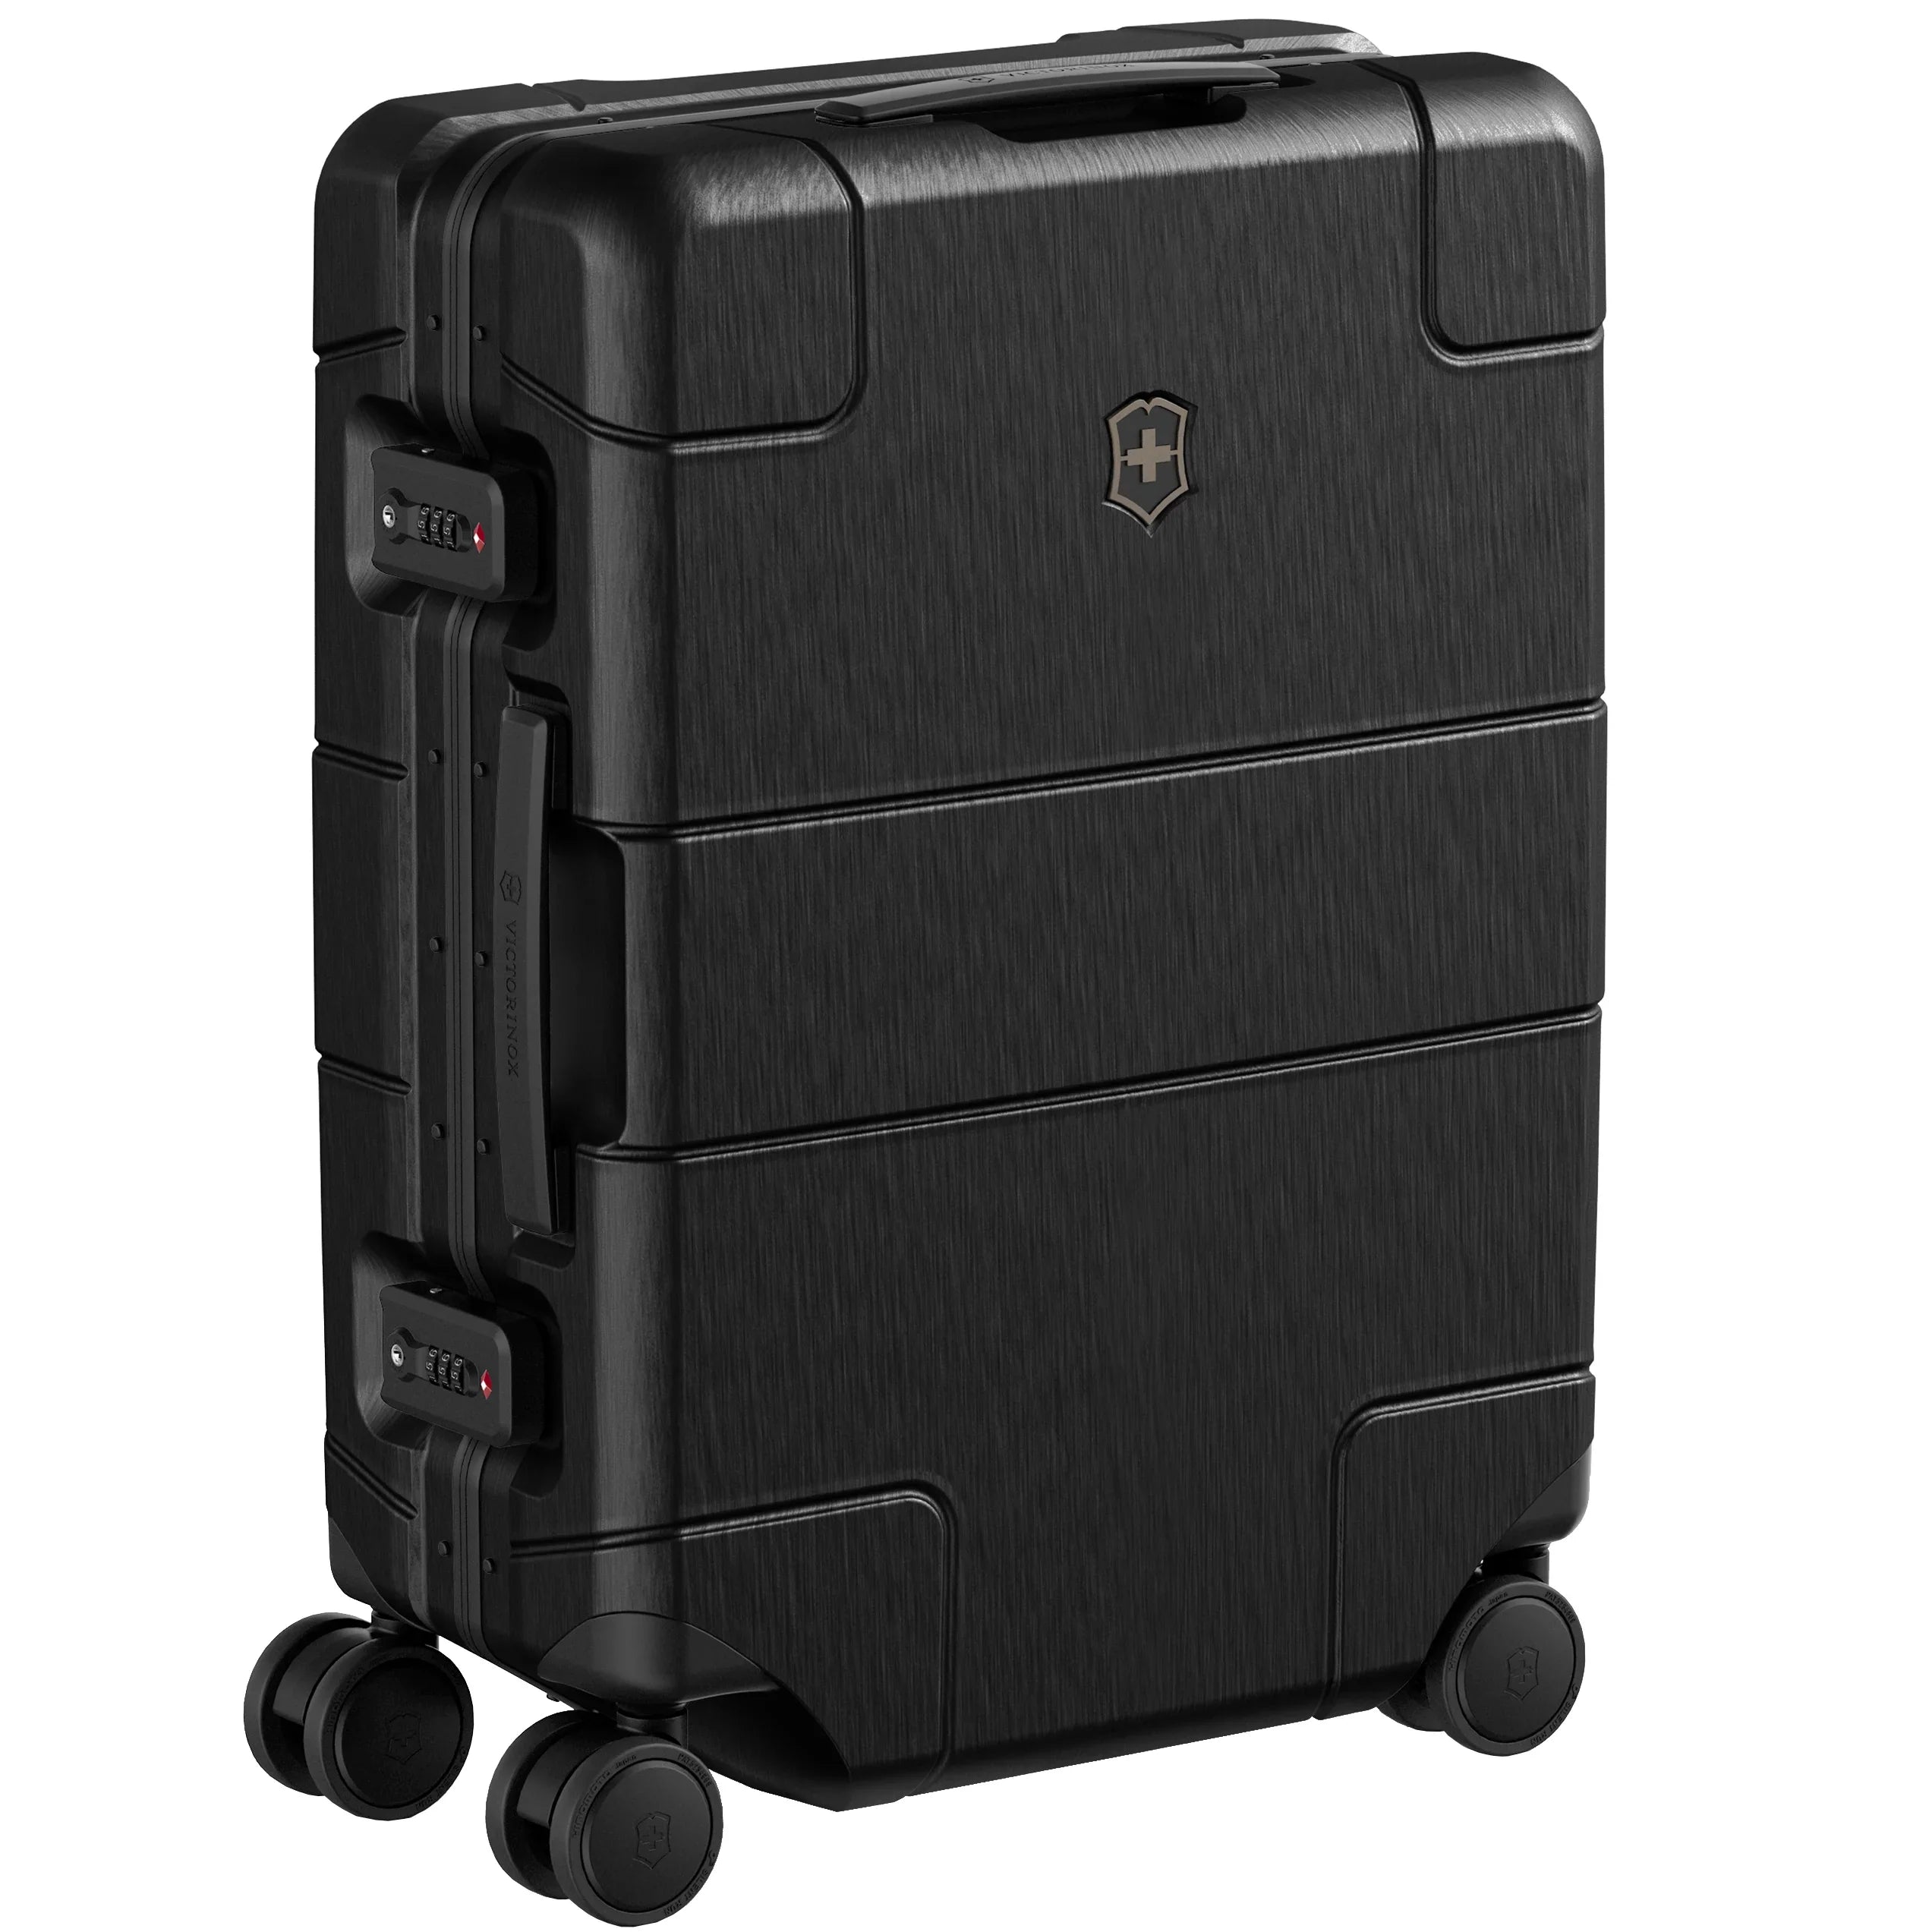 Victorinox Lexicon Framed Series Global Hardside Carry-On 55 cm - Silver